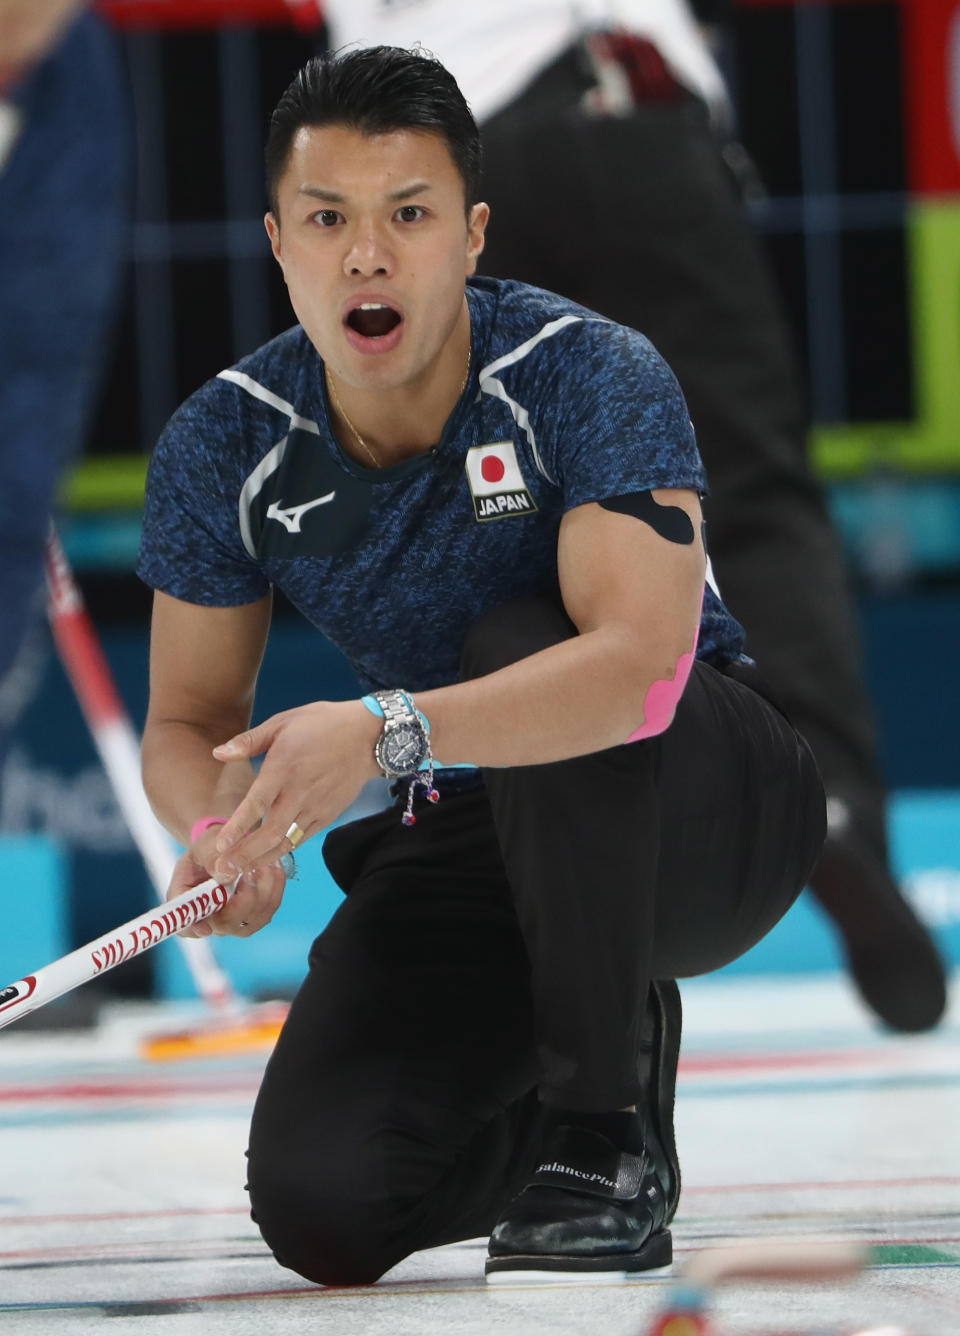 <p>Tsuyoshi Yamaguchi of Japan competes in the Curling Men’s Round Robin Session 5 held at Gangneung Curling Centre on February 16, 2018 in Gangneung, South Korea. </p>